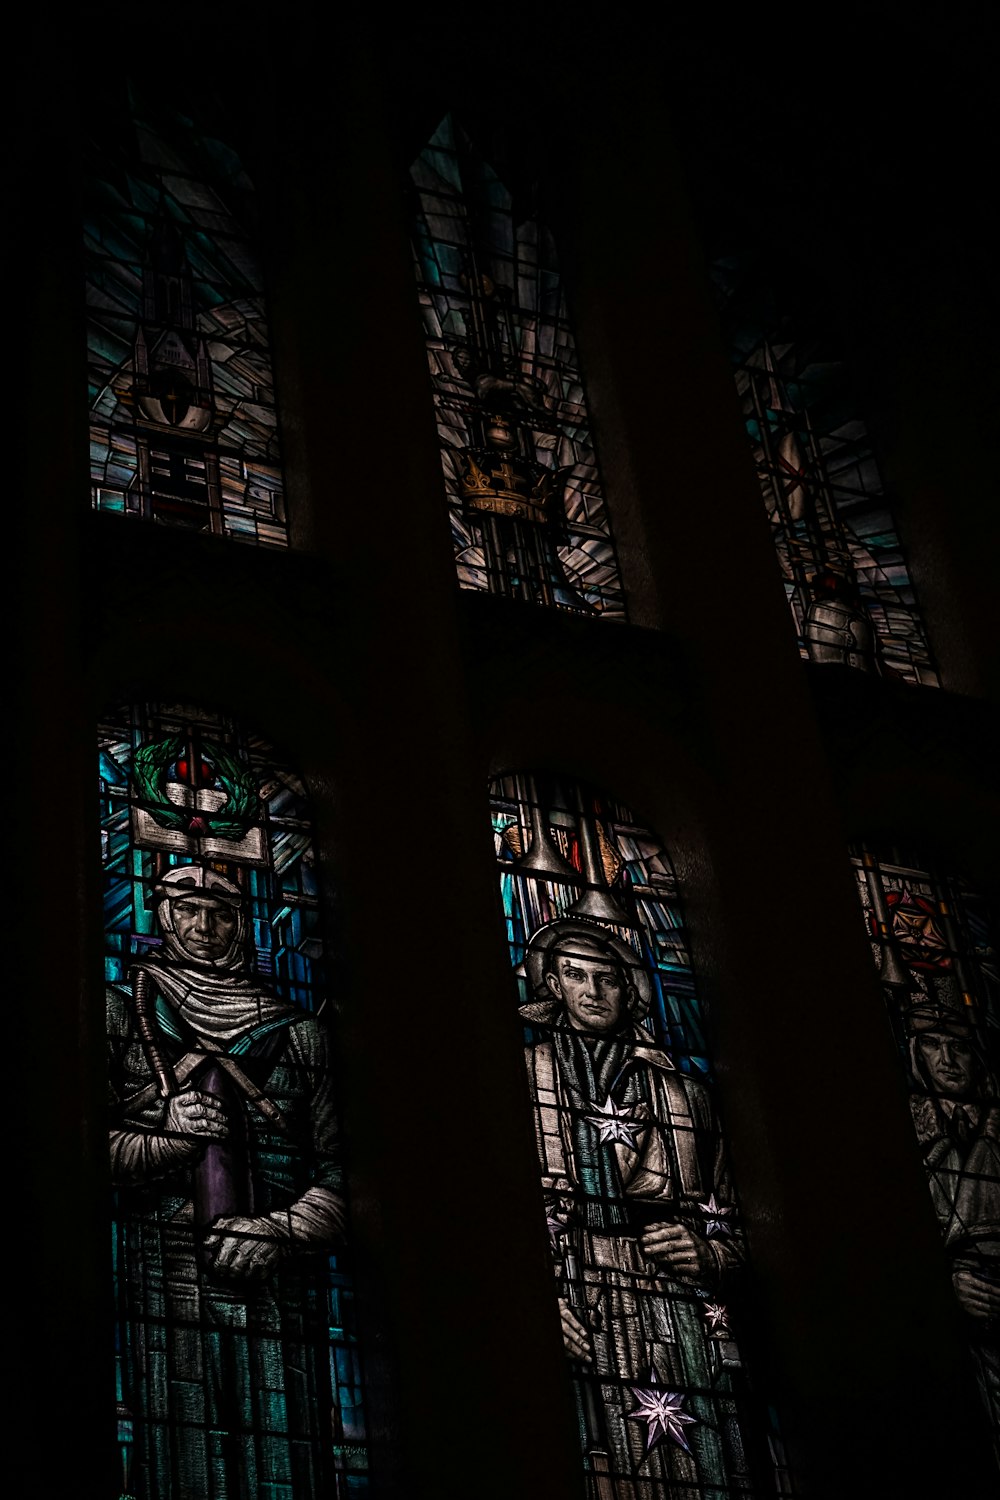 a stained glass window in a dark room